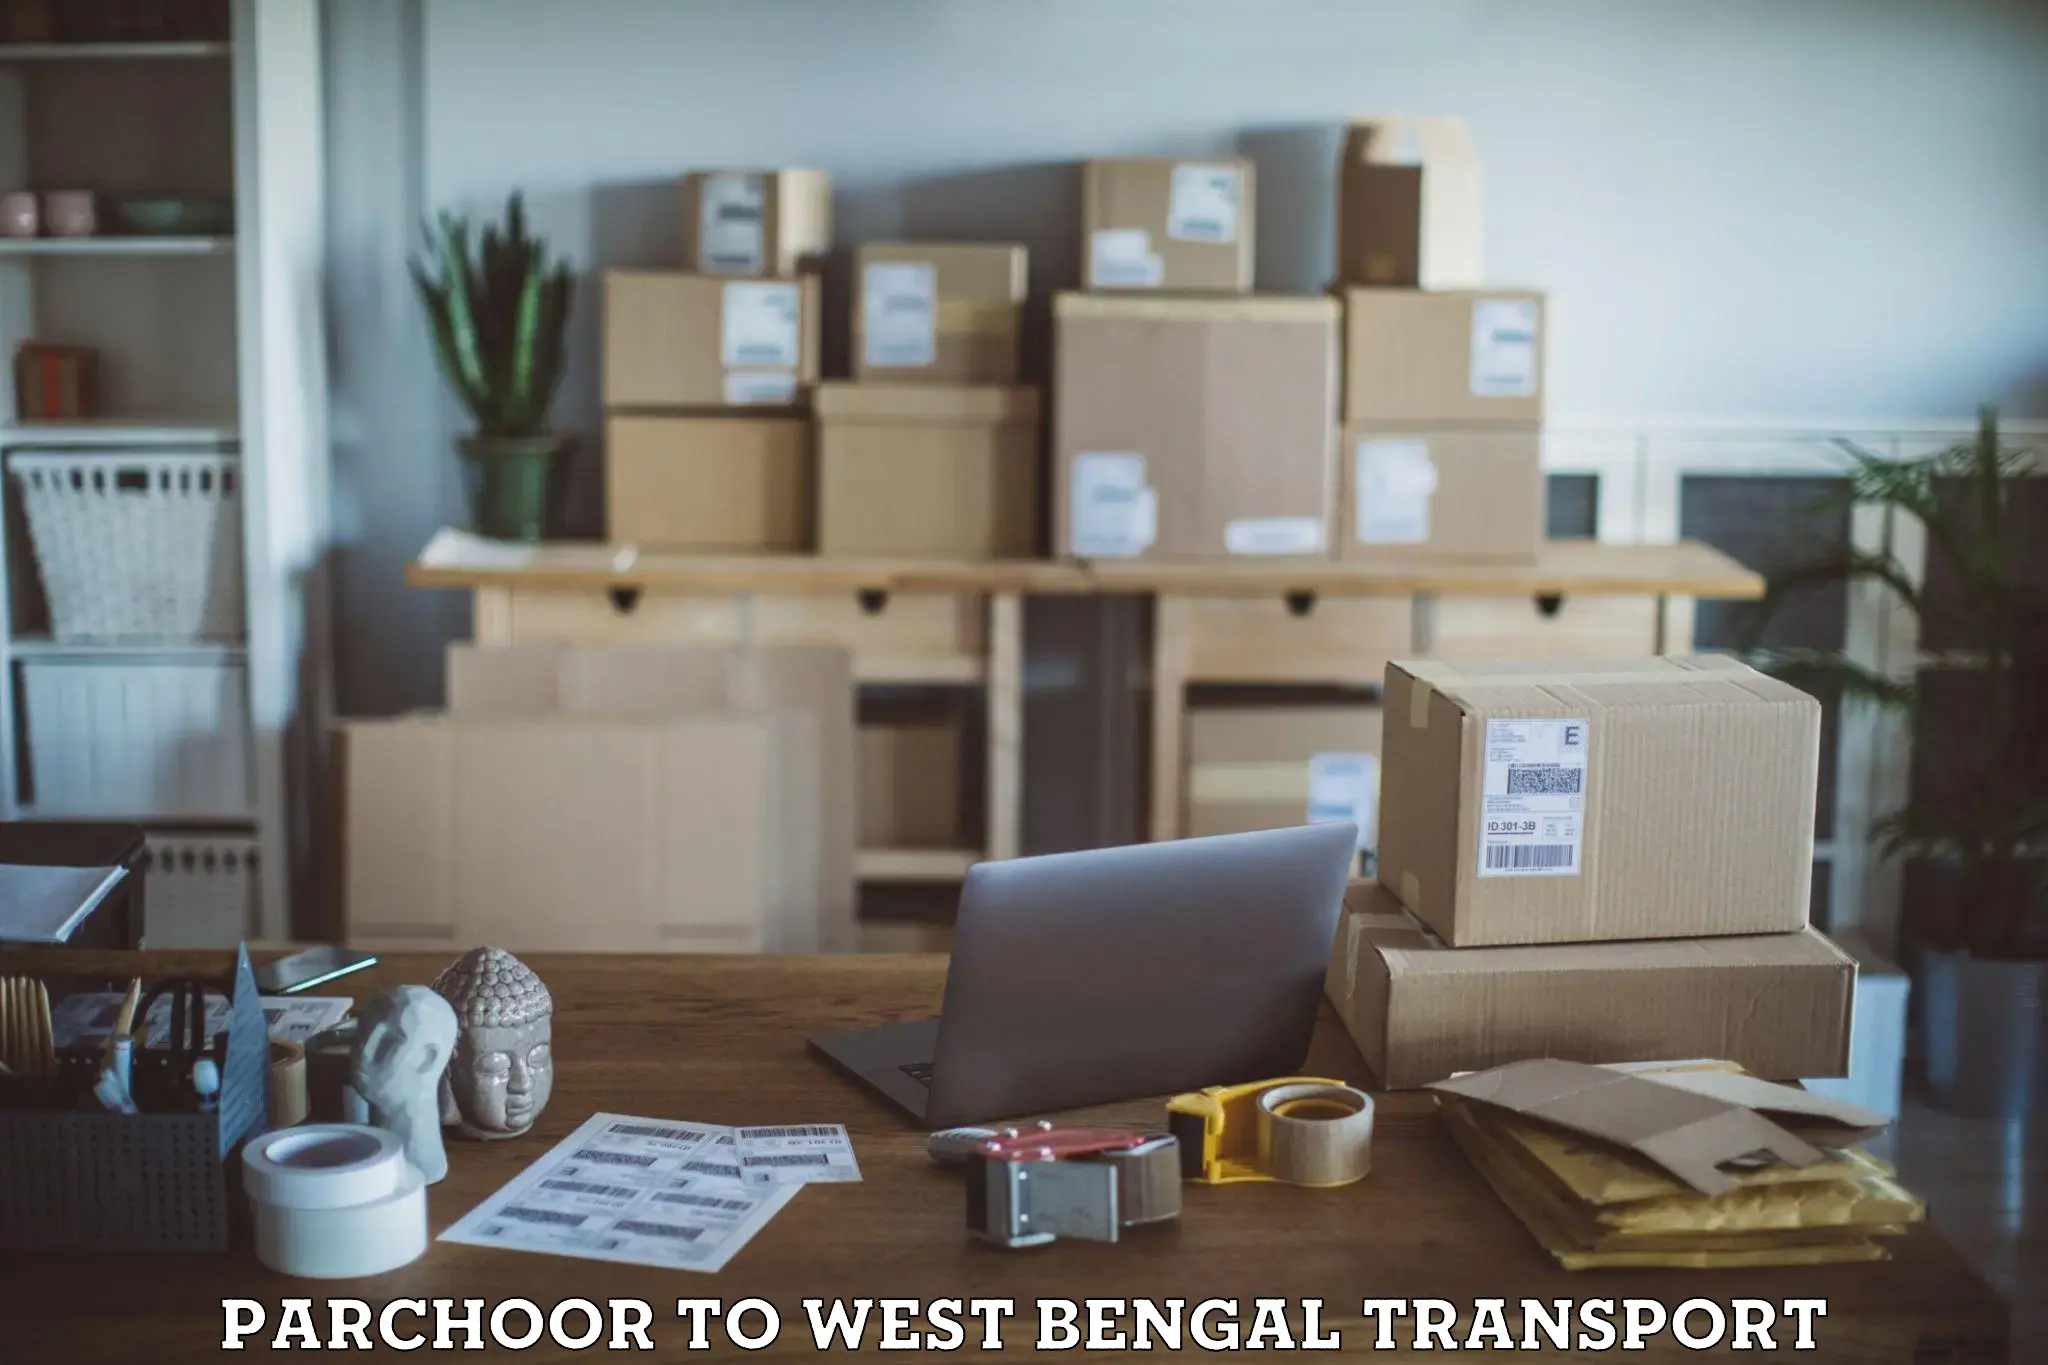 Nearby transport service Parchoor to West Bengal